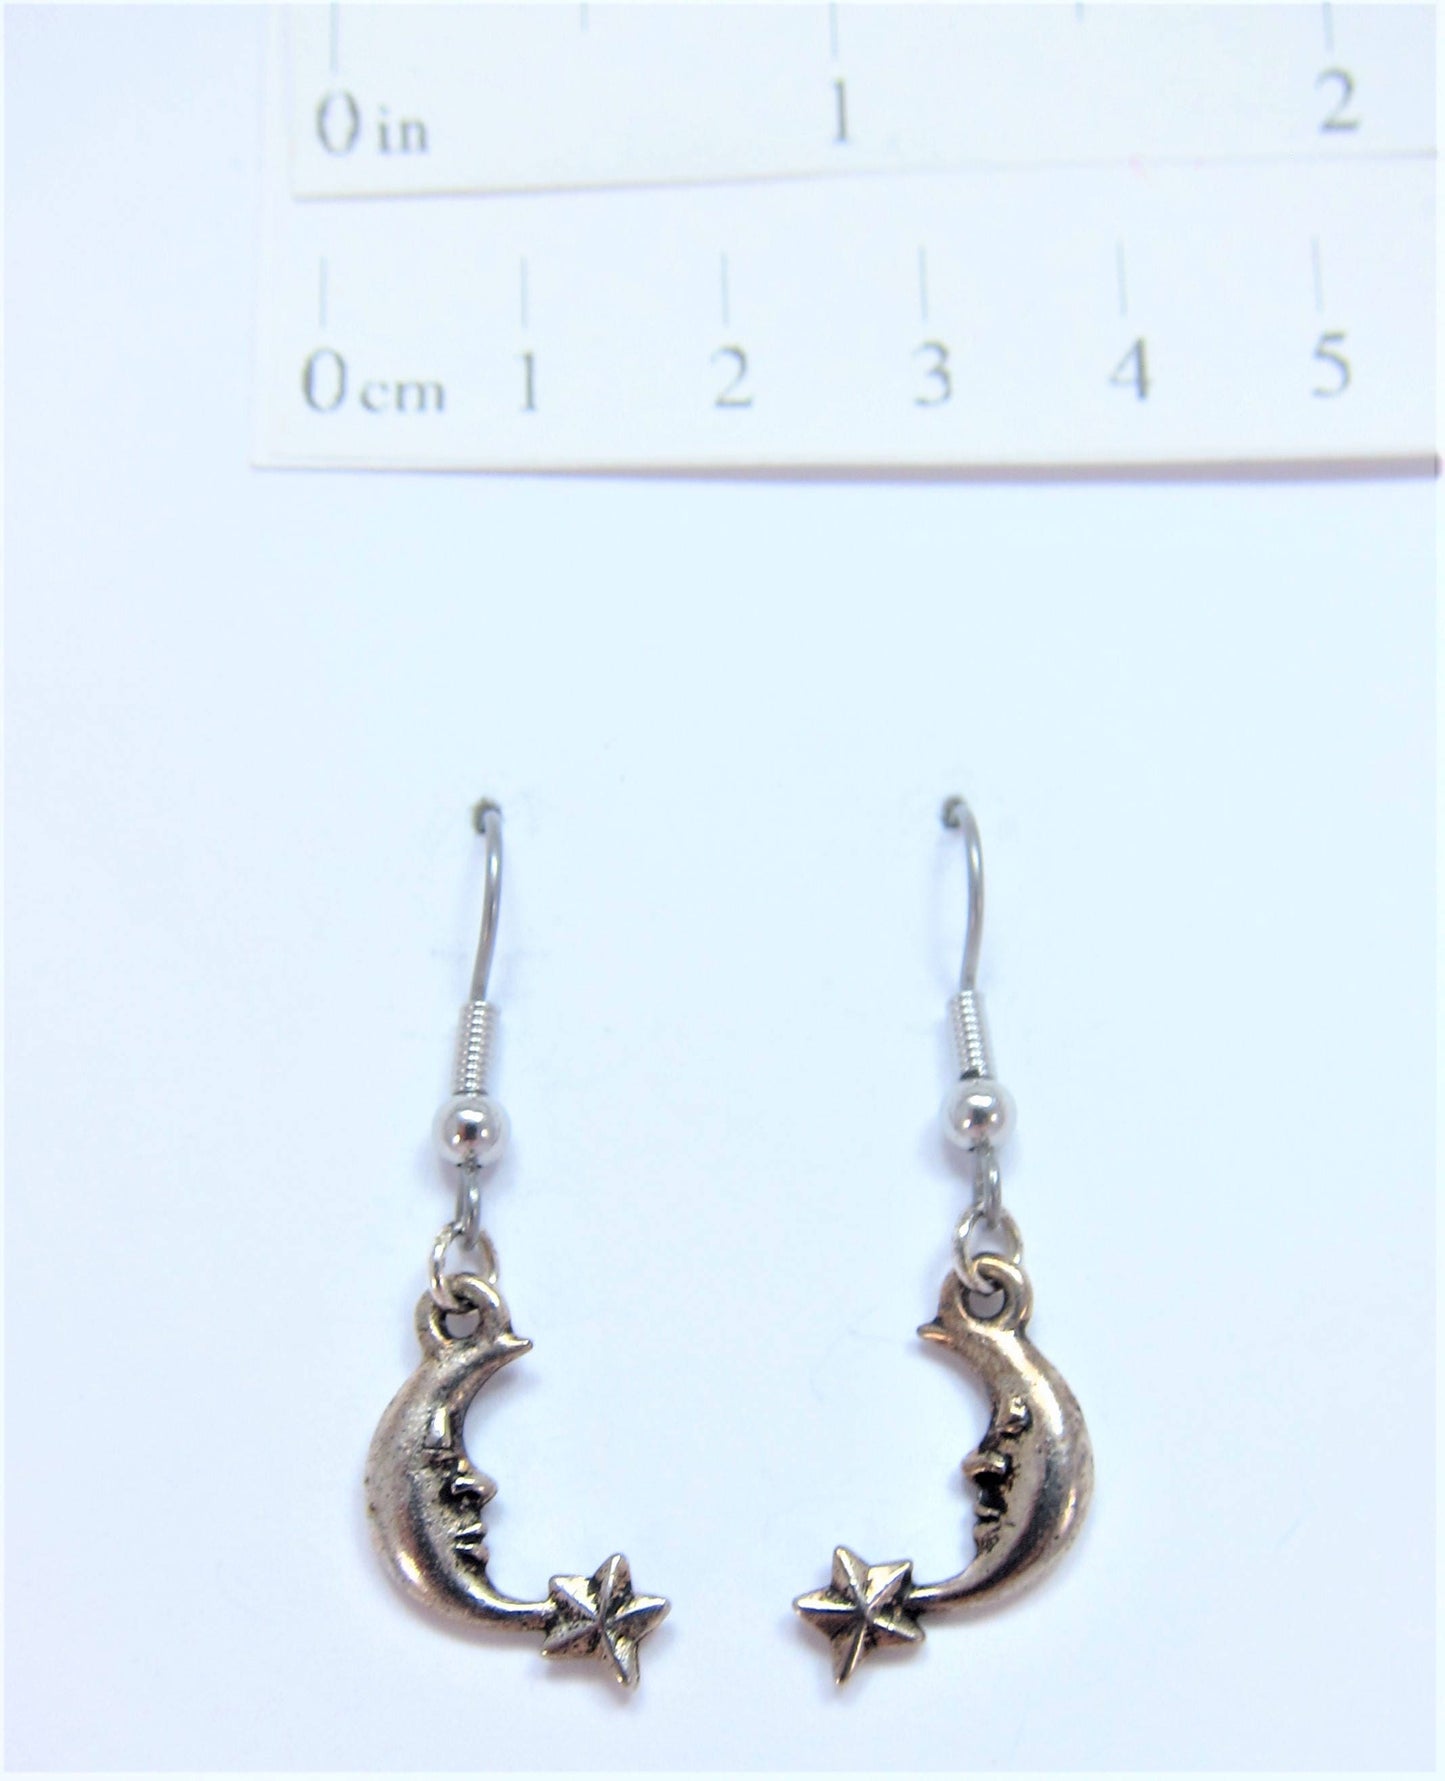 Charmed! Crescent moon earrings silver plate antique finish on hypoallergenic surgical steel hooks